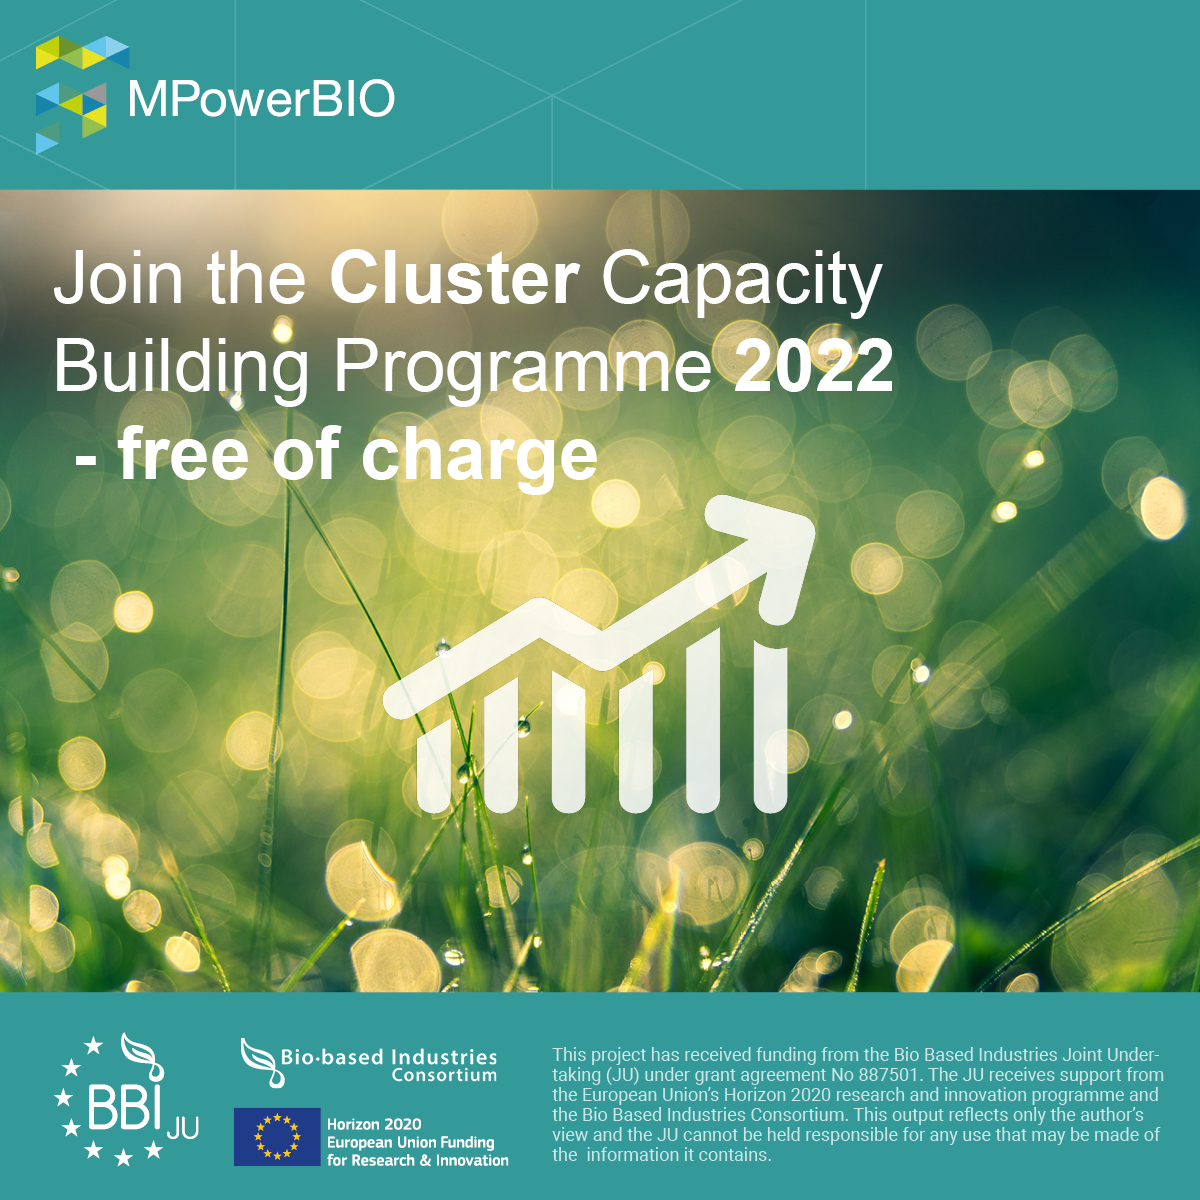 Are you a #cluster within the bio-based industry? Would you like to build links with investors and train your SME members in improving their Investment Readiness Level = increase their chance of securing investment? Check out @MPowerBIO's free offer👉 bit.ly/3oyBmJ9